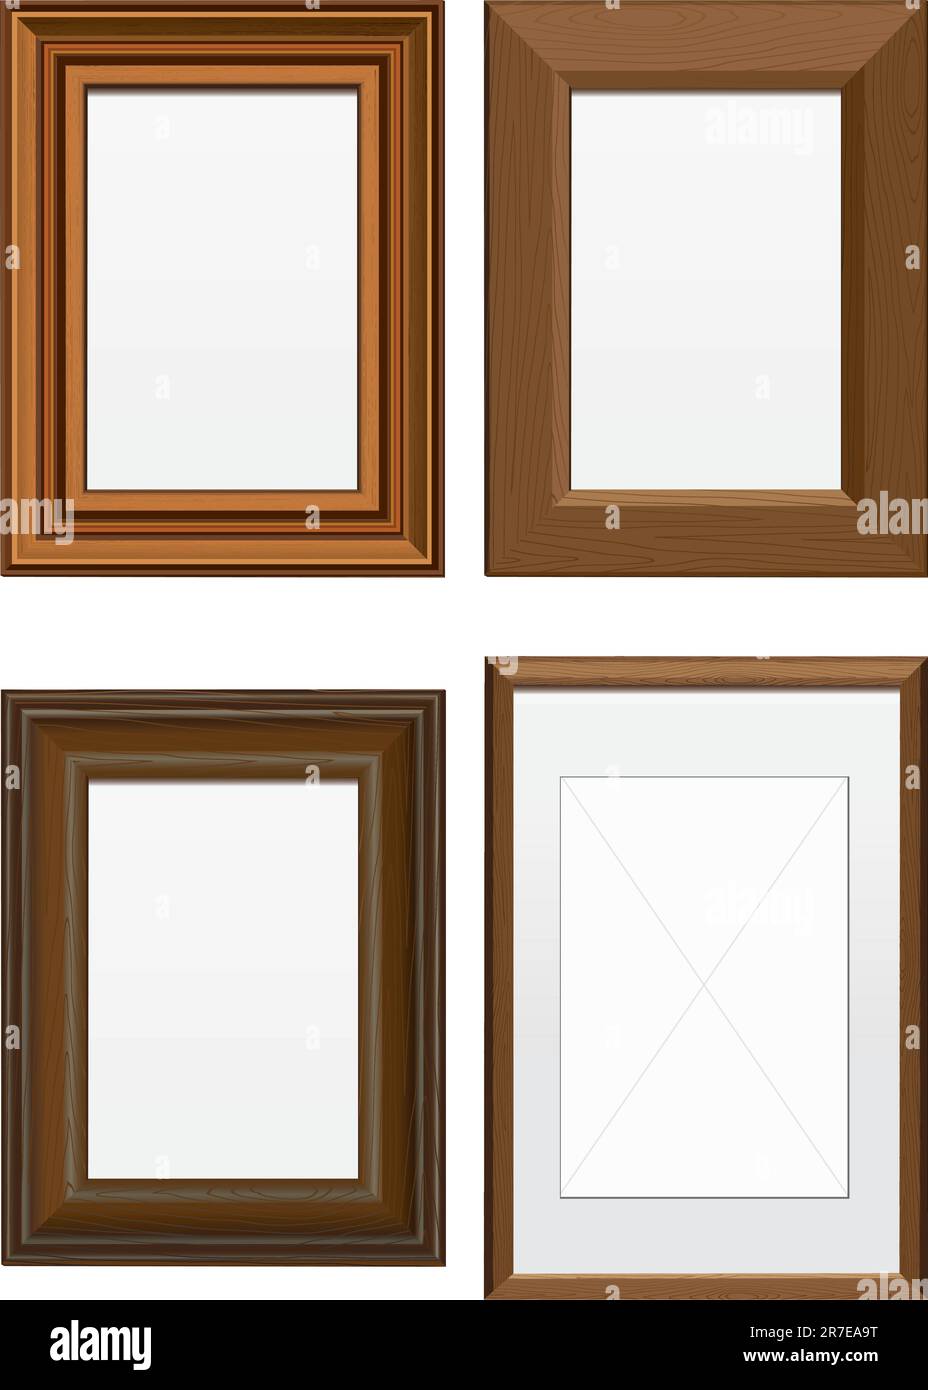 Vector illustration set of frames with wood texture. All vector objects are isolated and grouped. Colors and transparent background color are easy ... Stock Vector